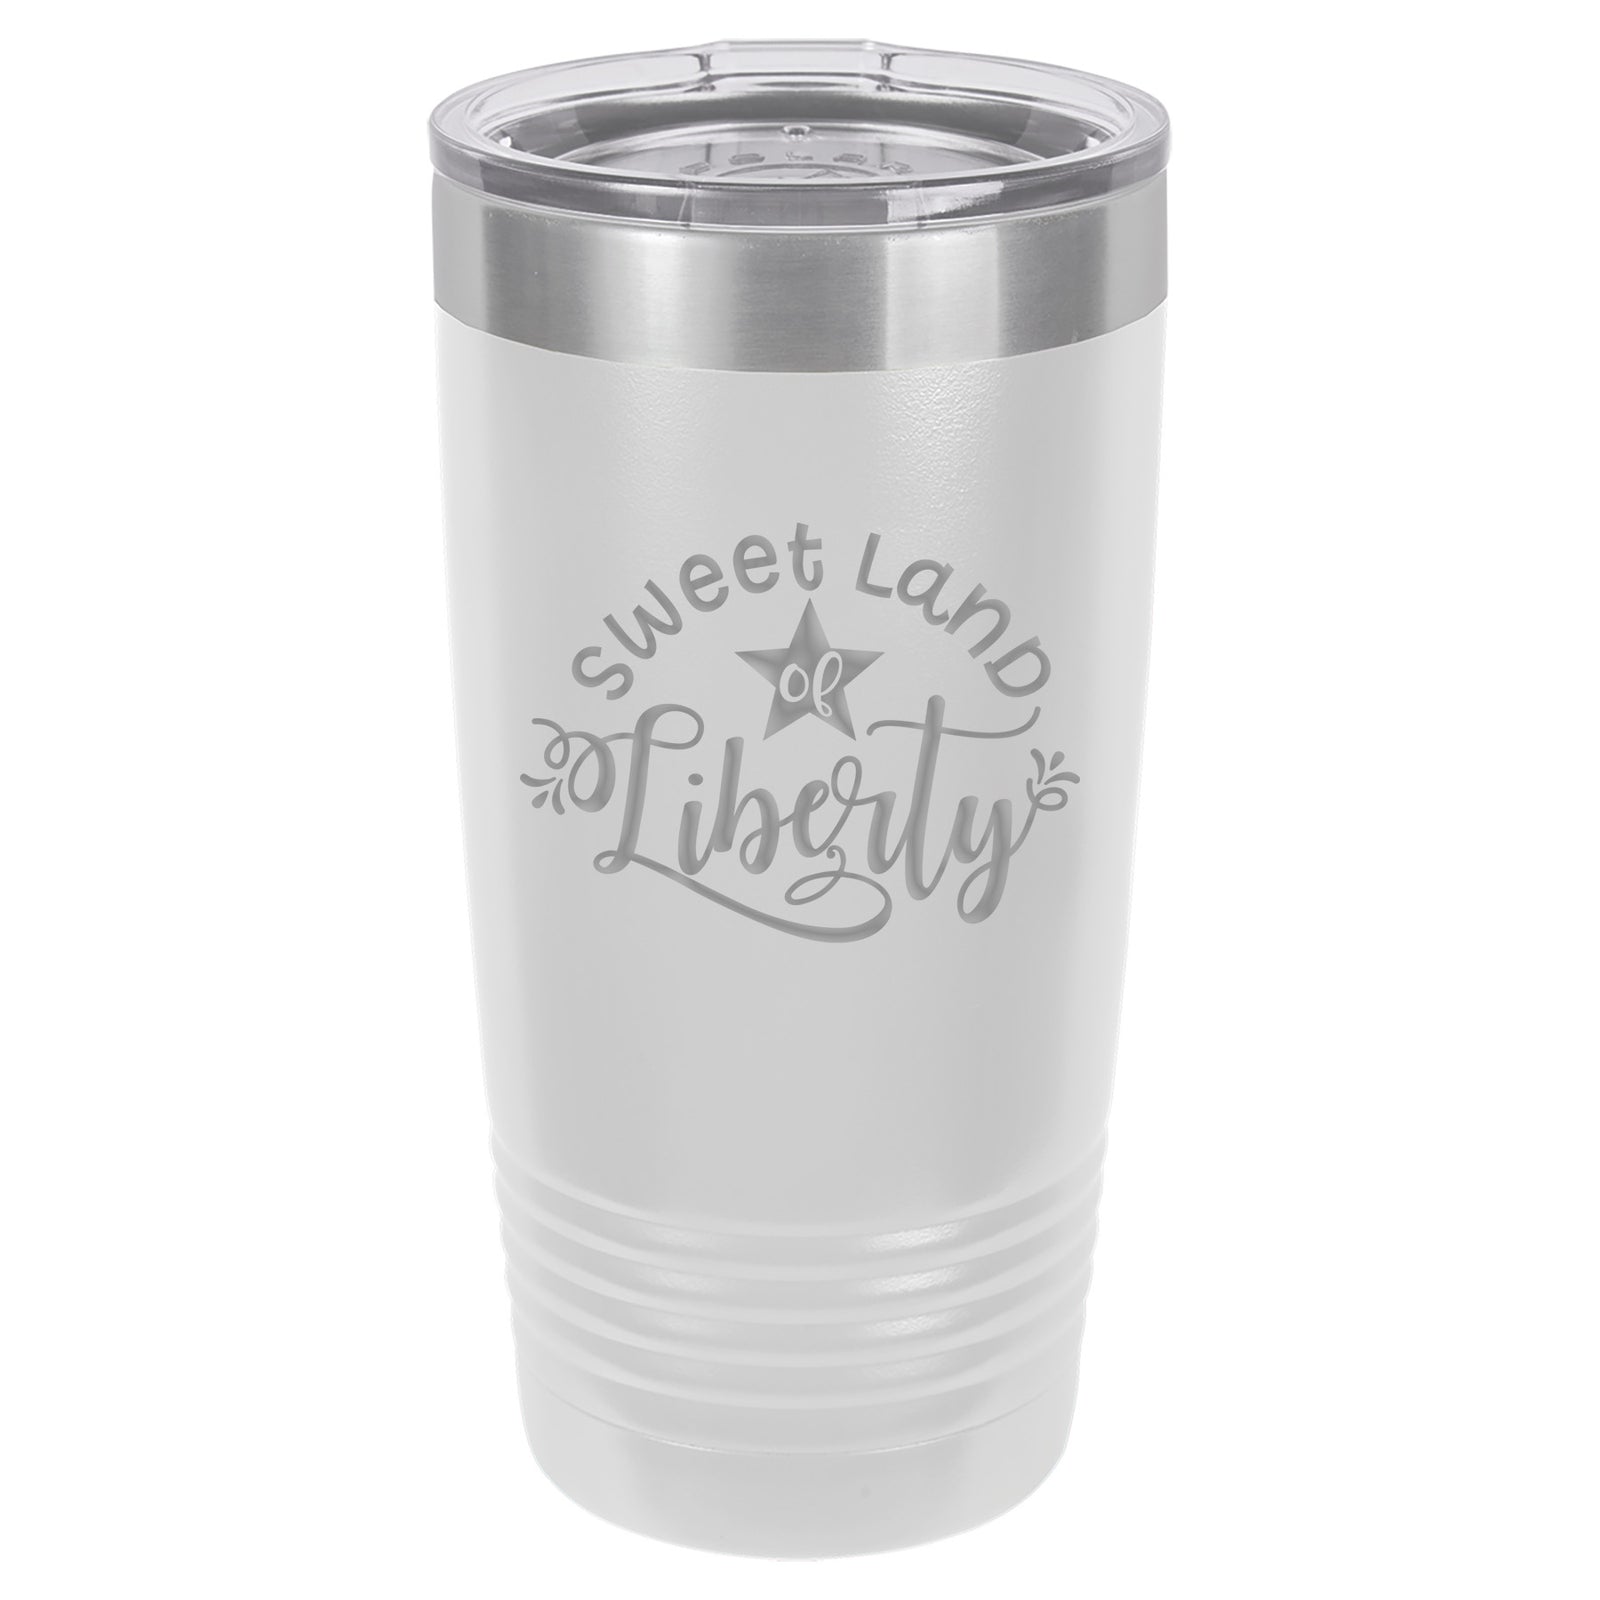 Liberty 12 oz. Deep Navy Insulated Stainless Steel Water Bottle